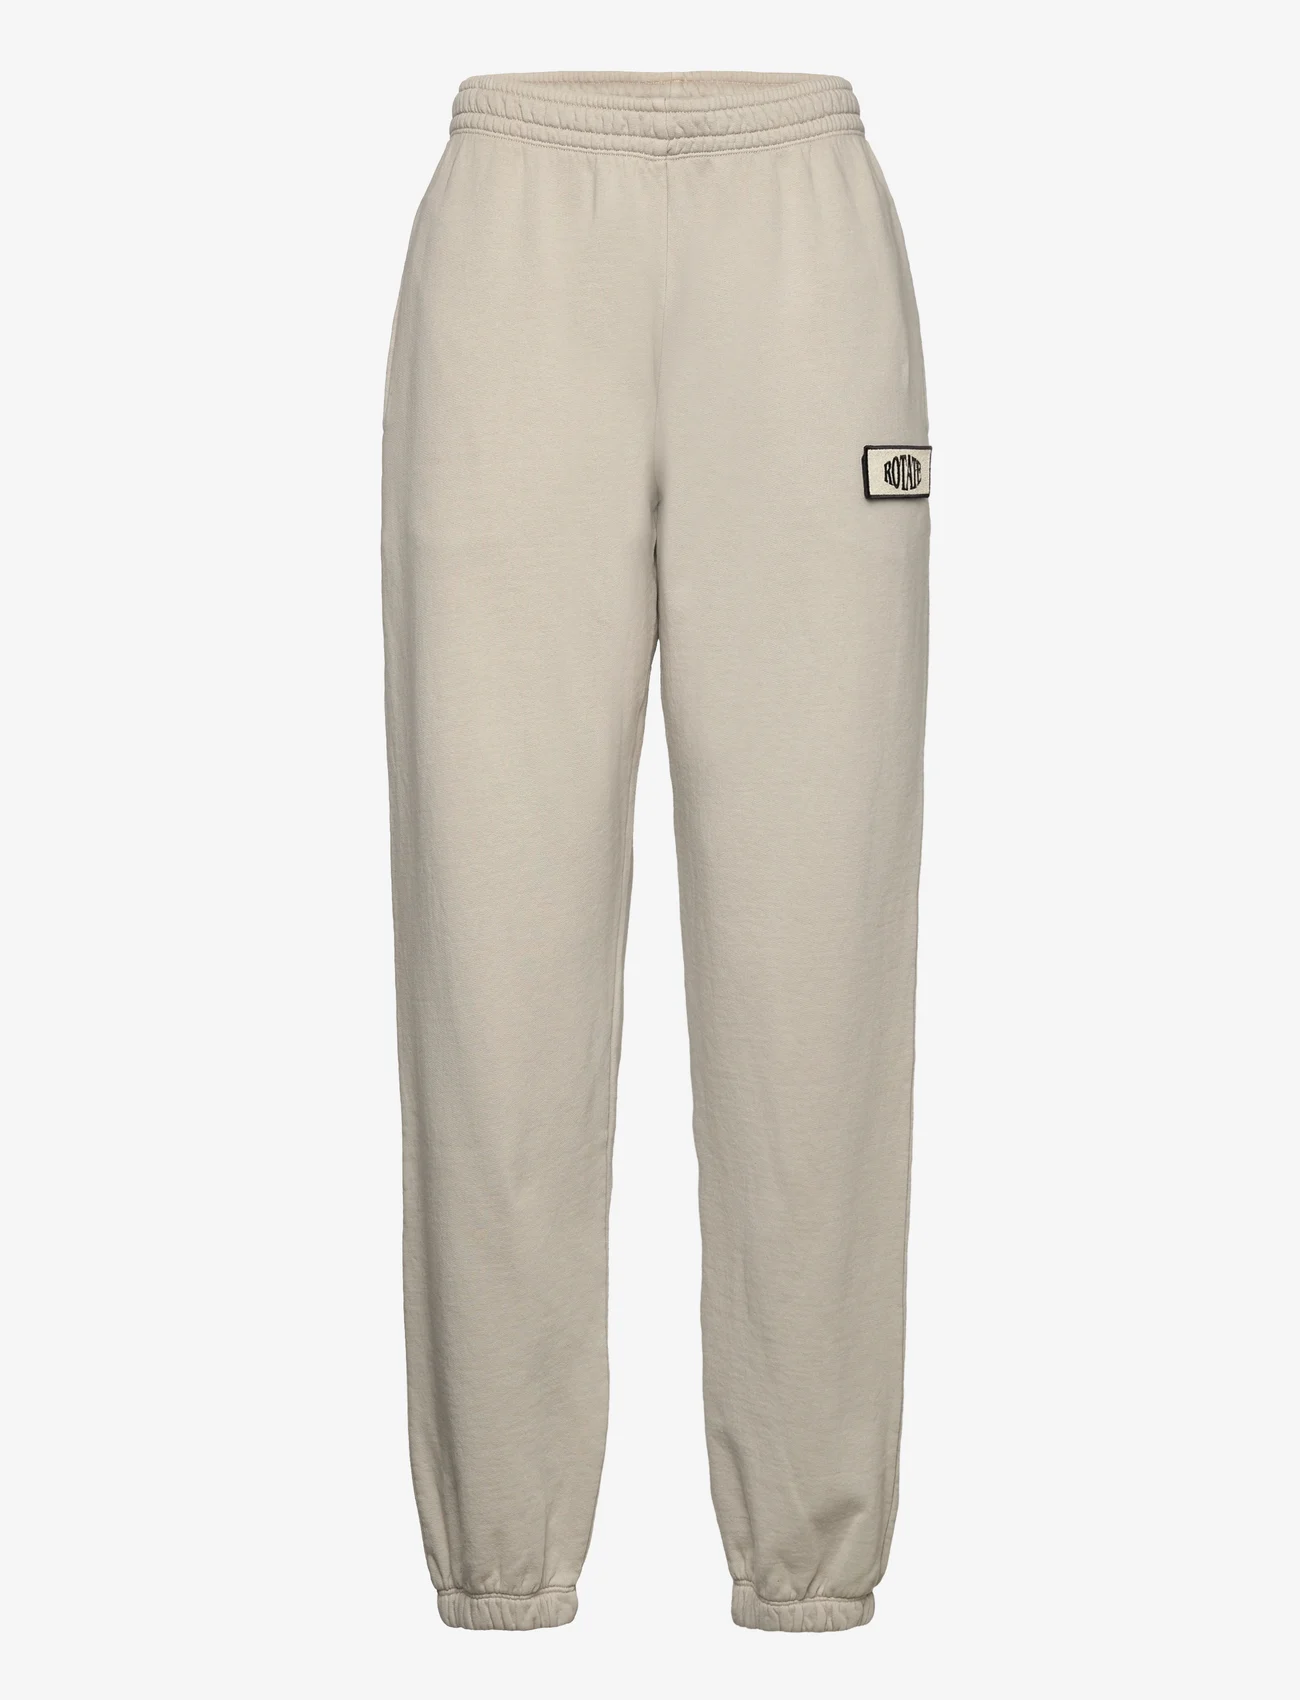 ROTATE Birger Christensen - Enzyme Wash Sweatpants - oyster gray - 0